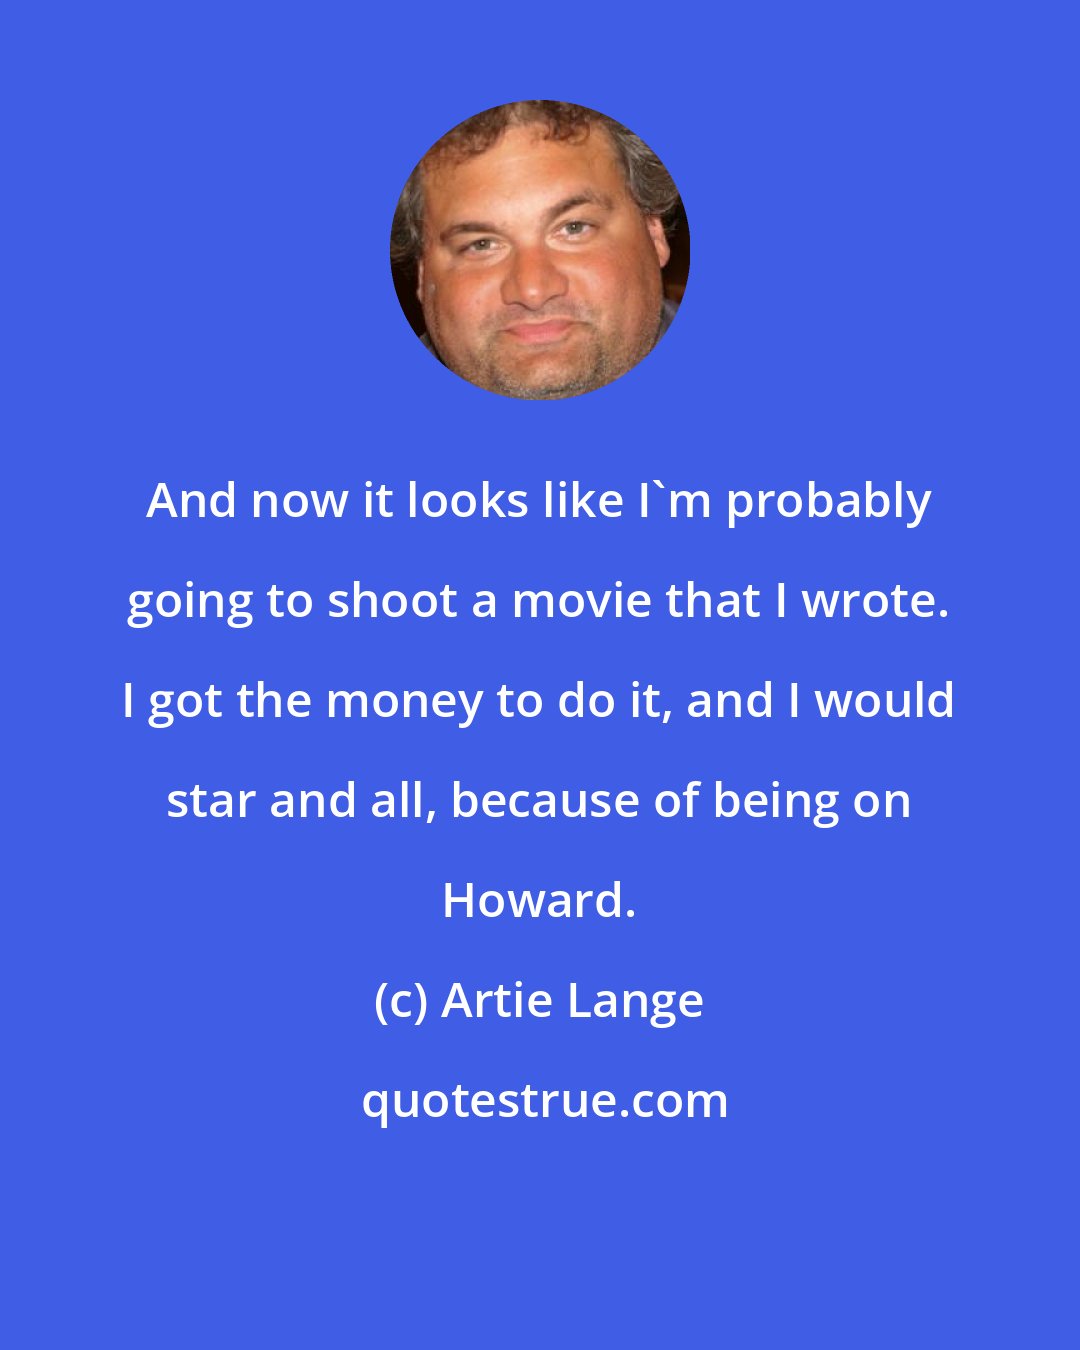 Artie Lange: And now it looks like I'm probably going to shoot a movie that I wrote. I got the money to do it, and I would star and all, because of being on Howard.